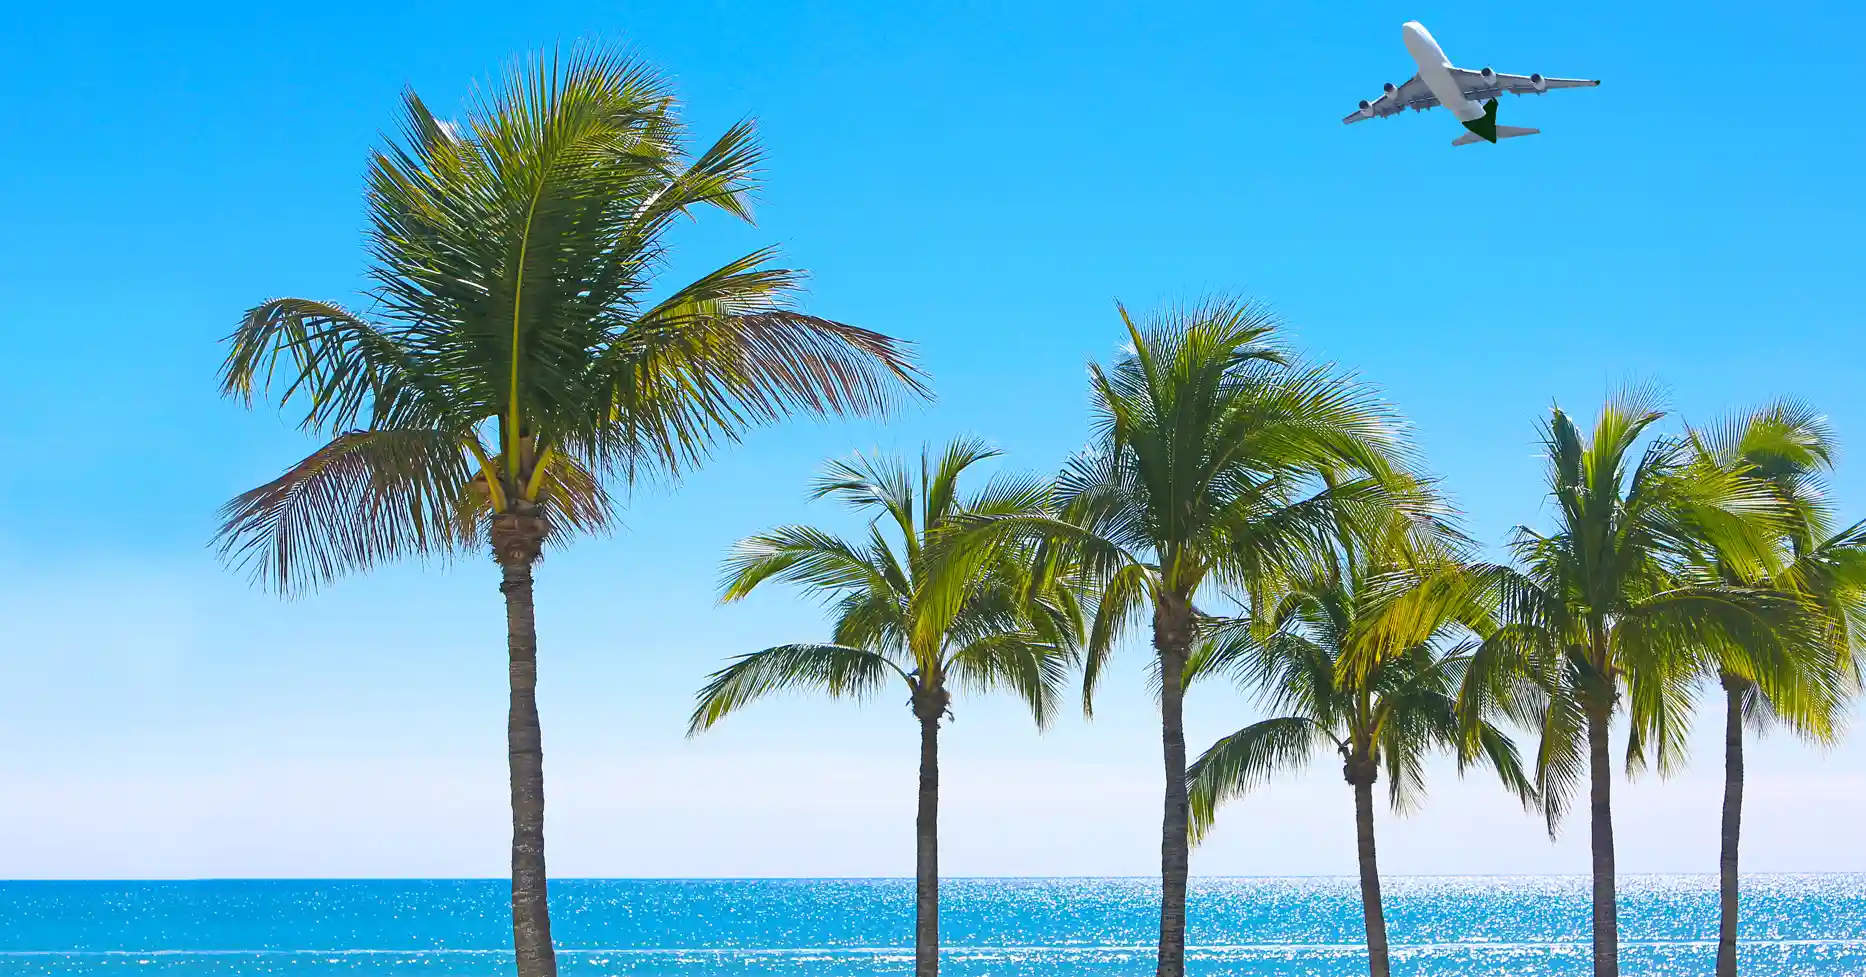 Row of palm trees on sunny beach in front of calm ocean as airplane flies overhead